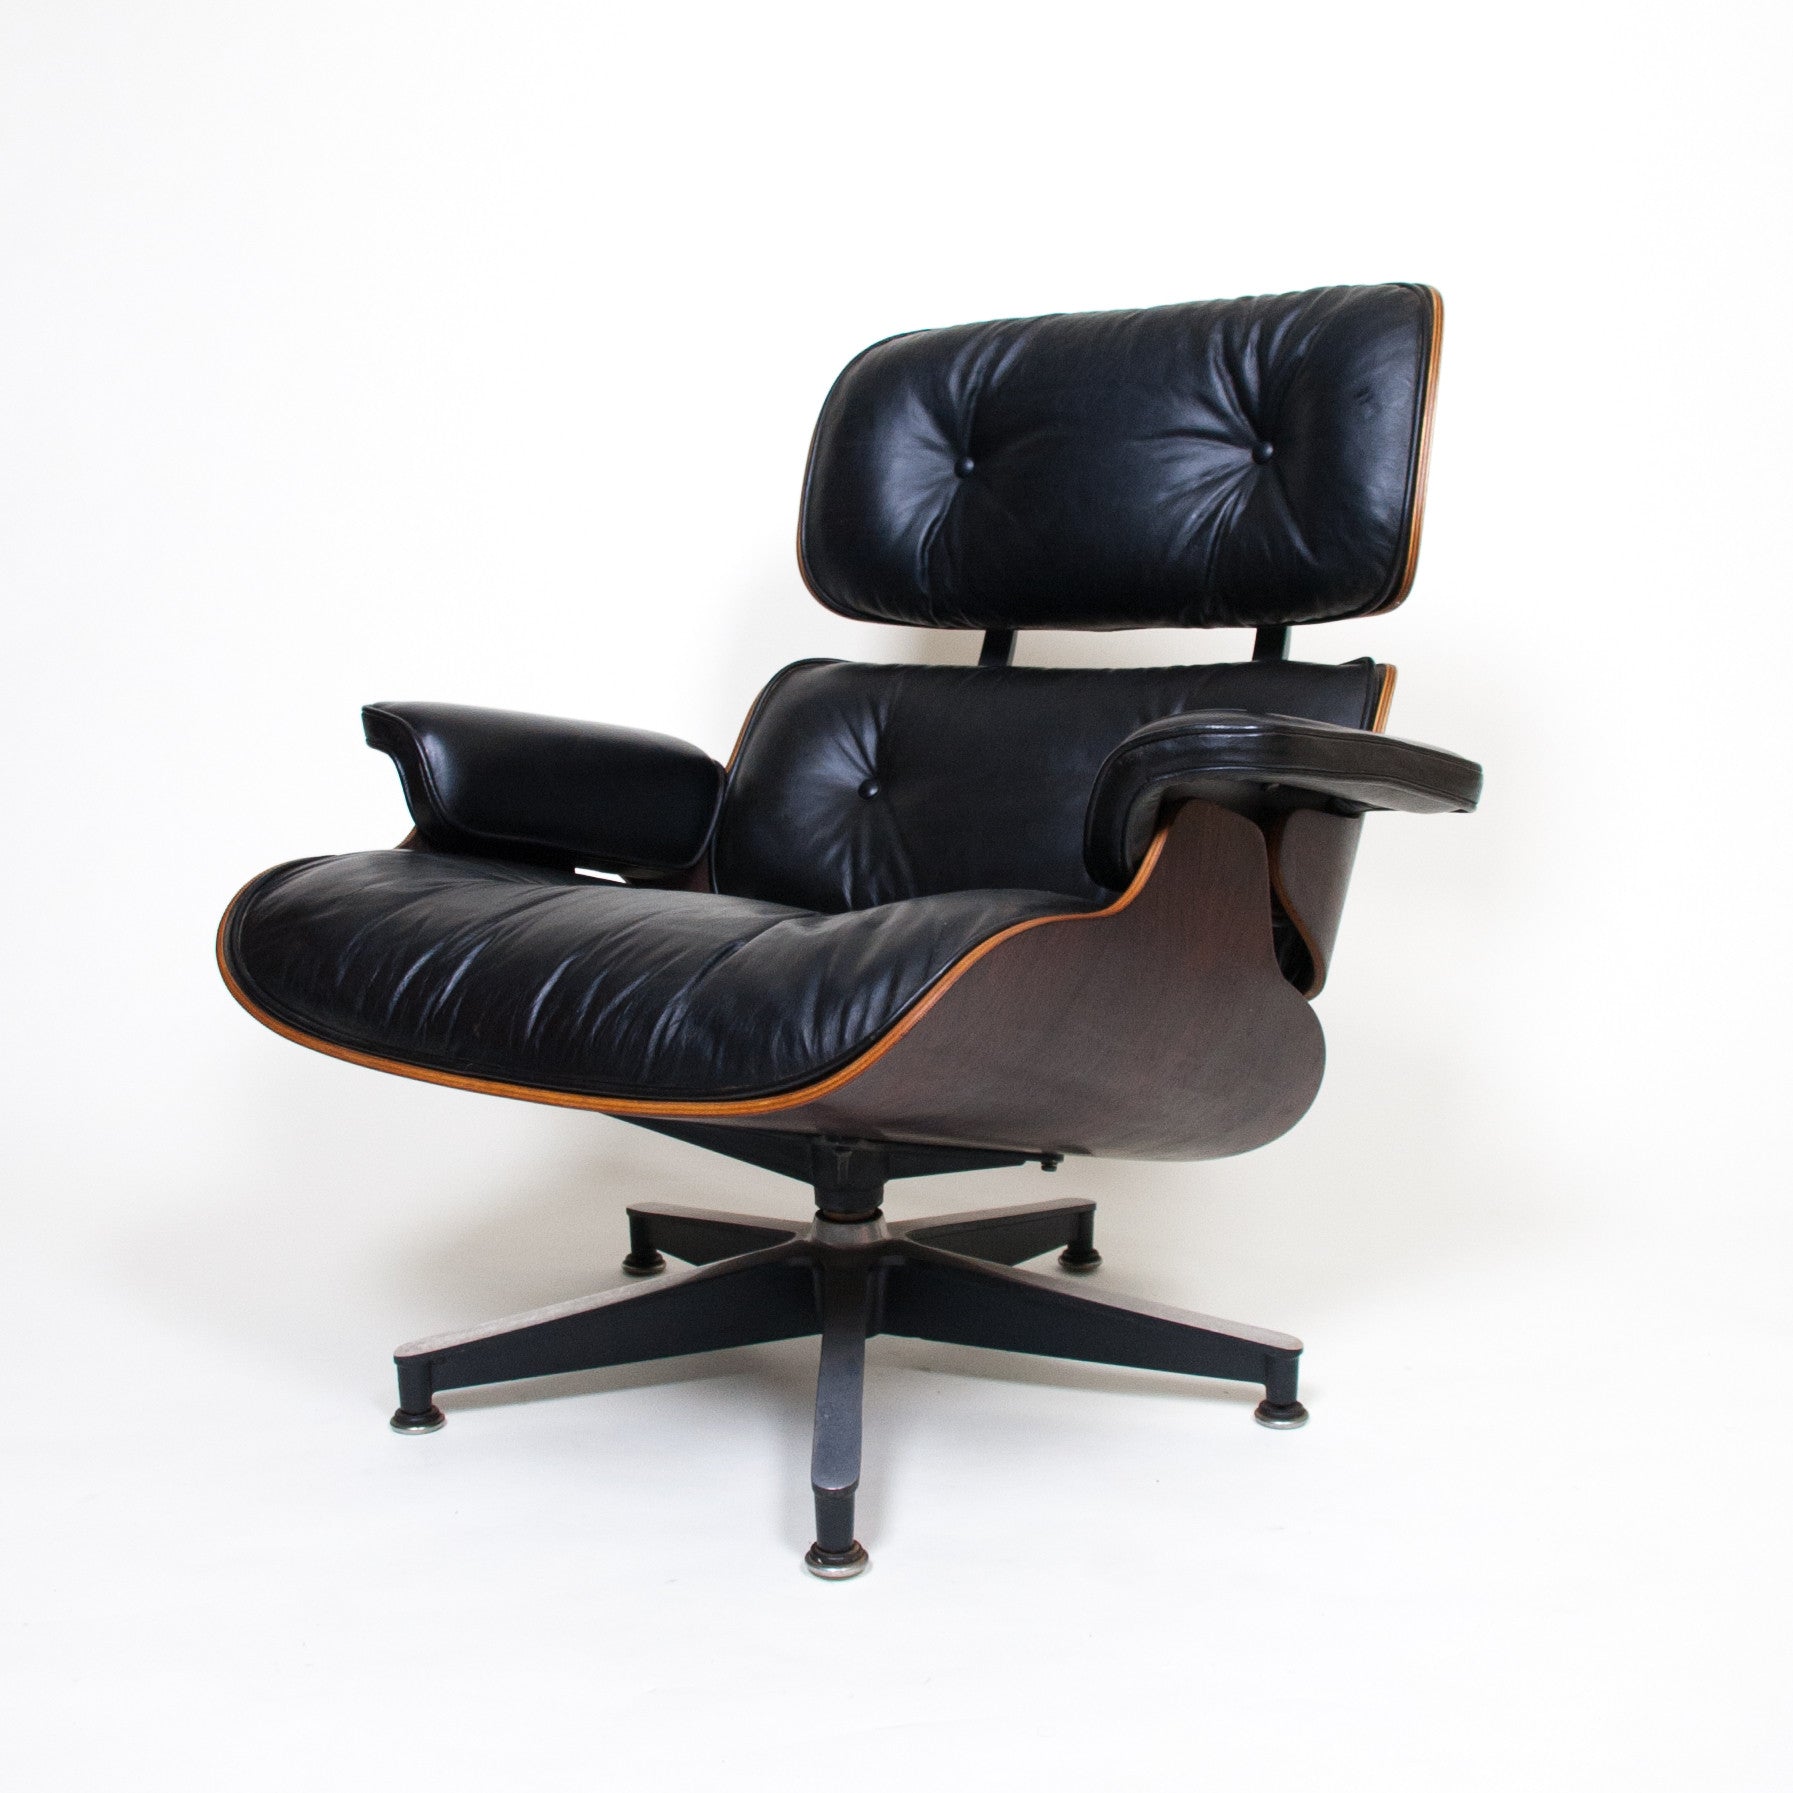 SOLD 1971 Herman Miller Eames Lounge Chair & Ottoman Rosewood 670 671